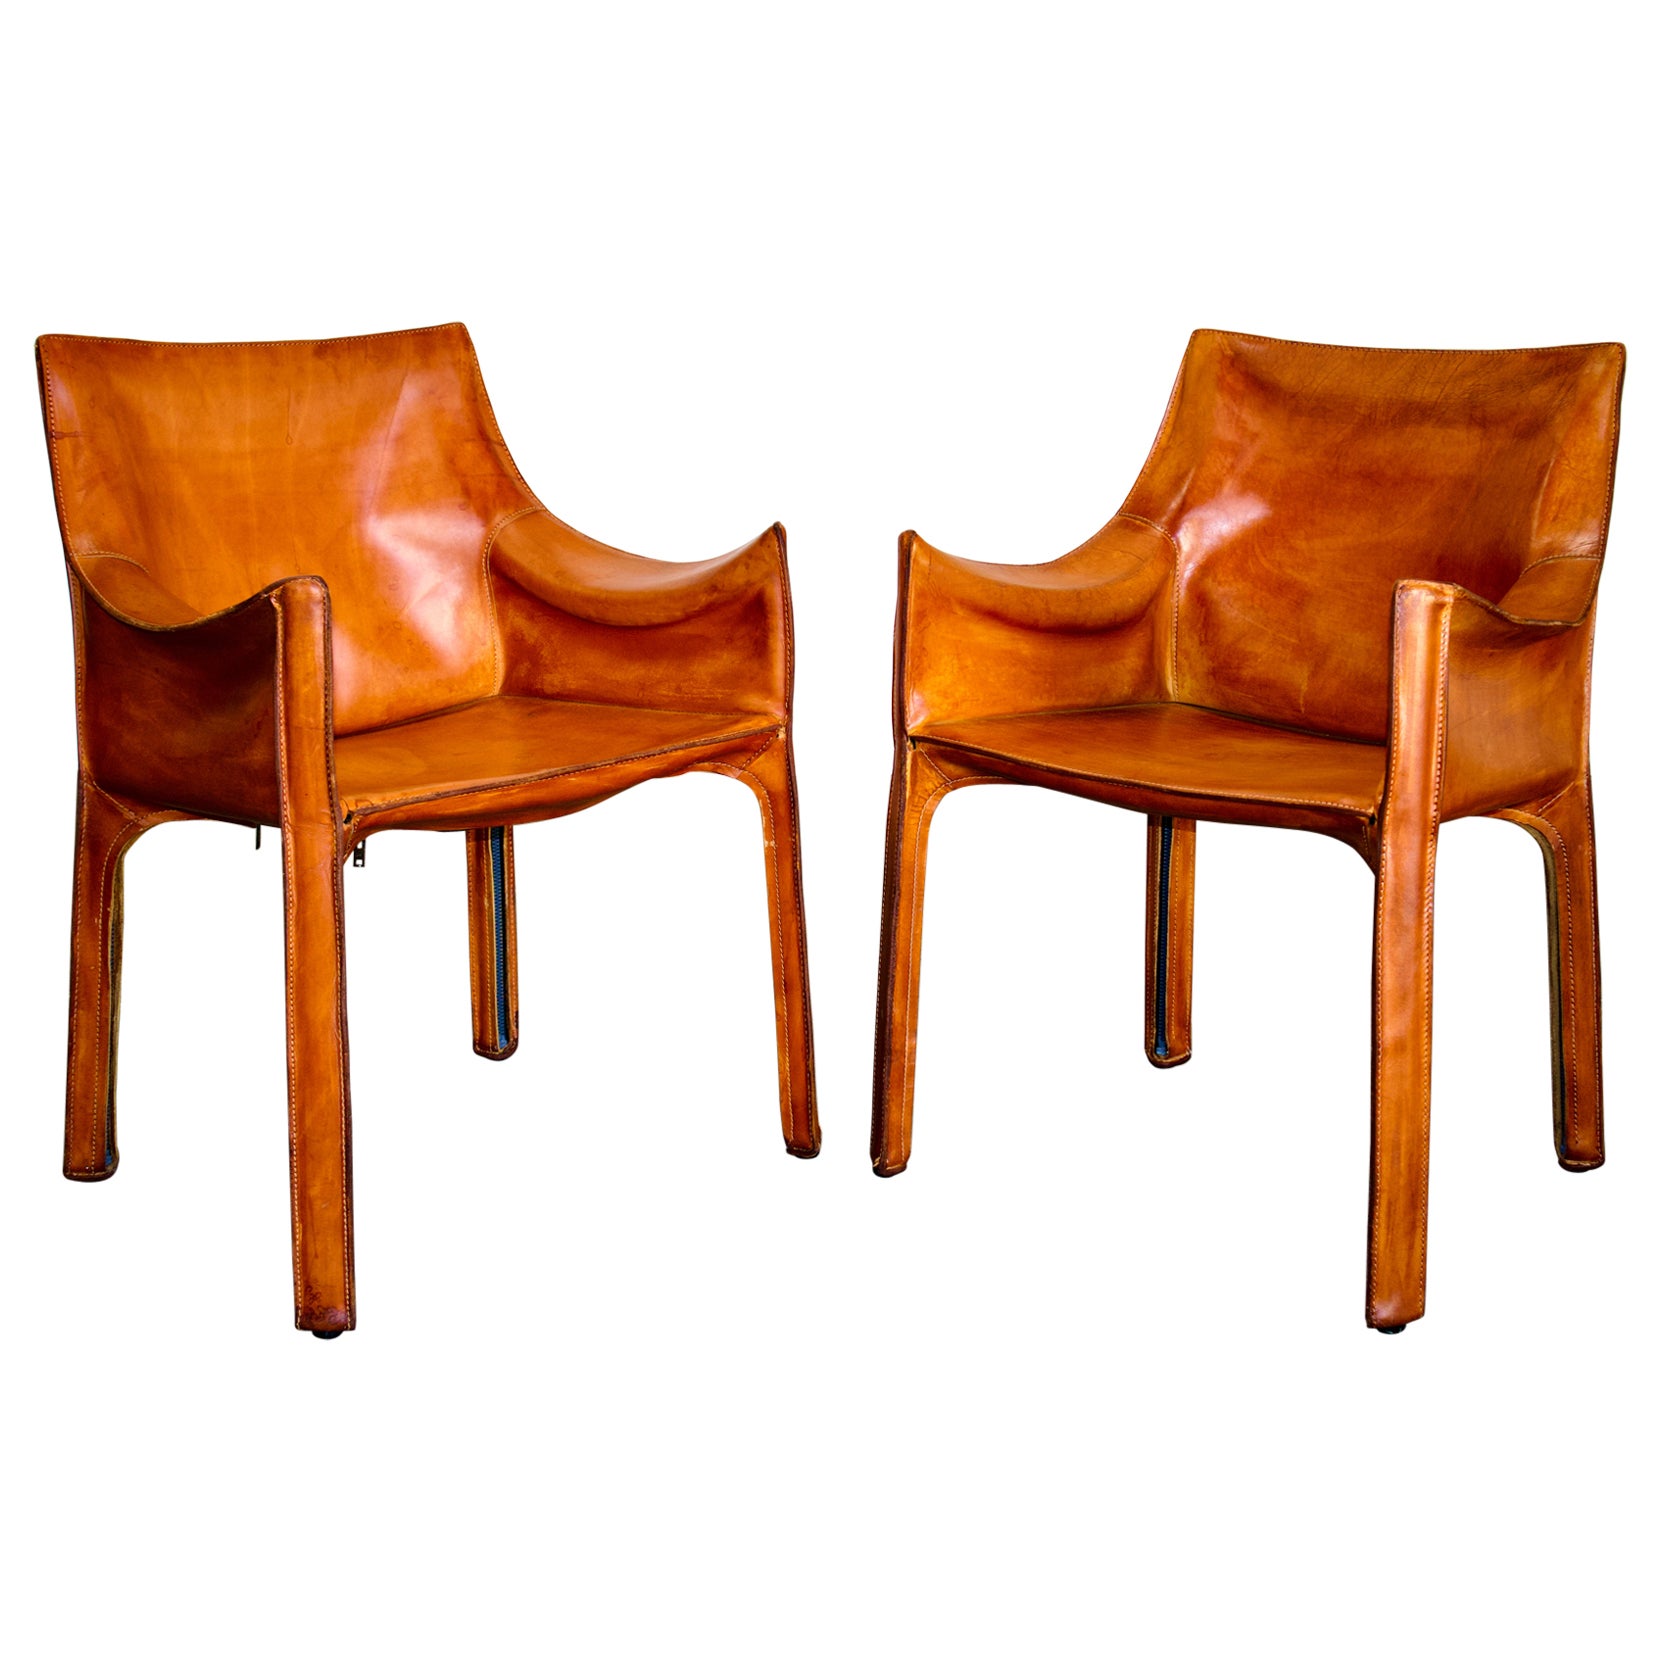 Pair of Bellini CAB 413 Armchairs in Vintage Cognac Saddle Leather for Cassina